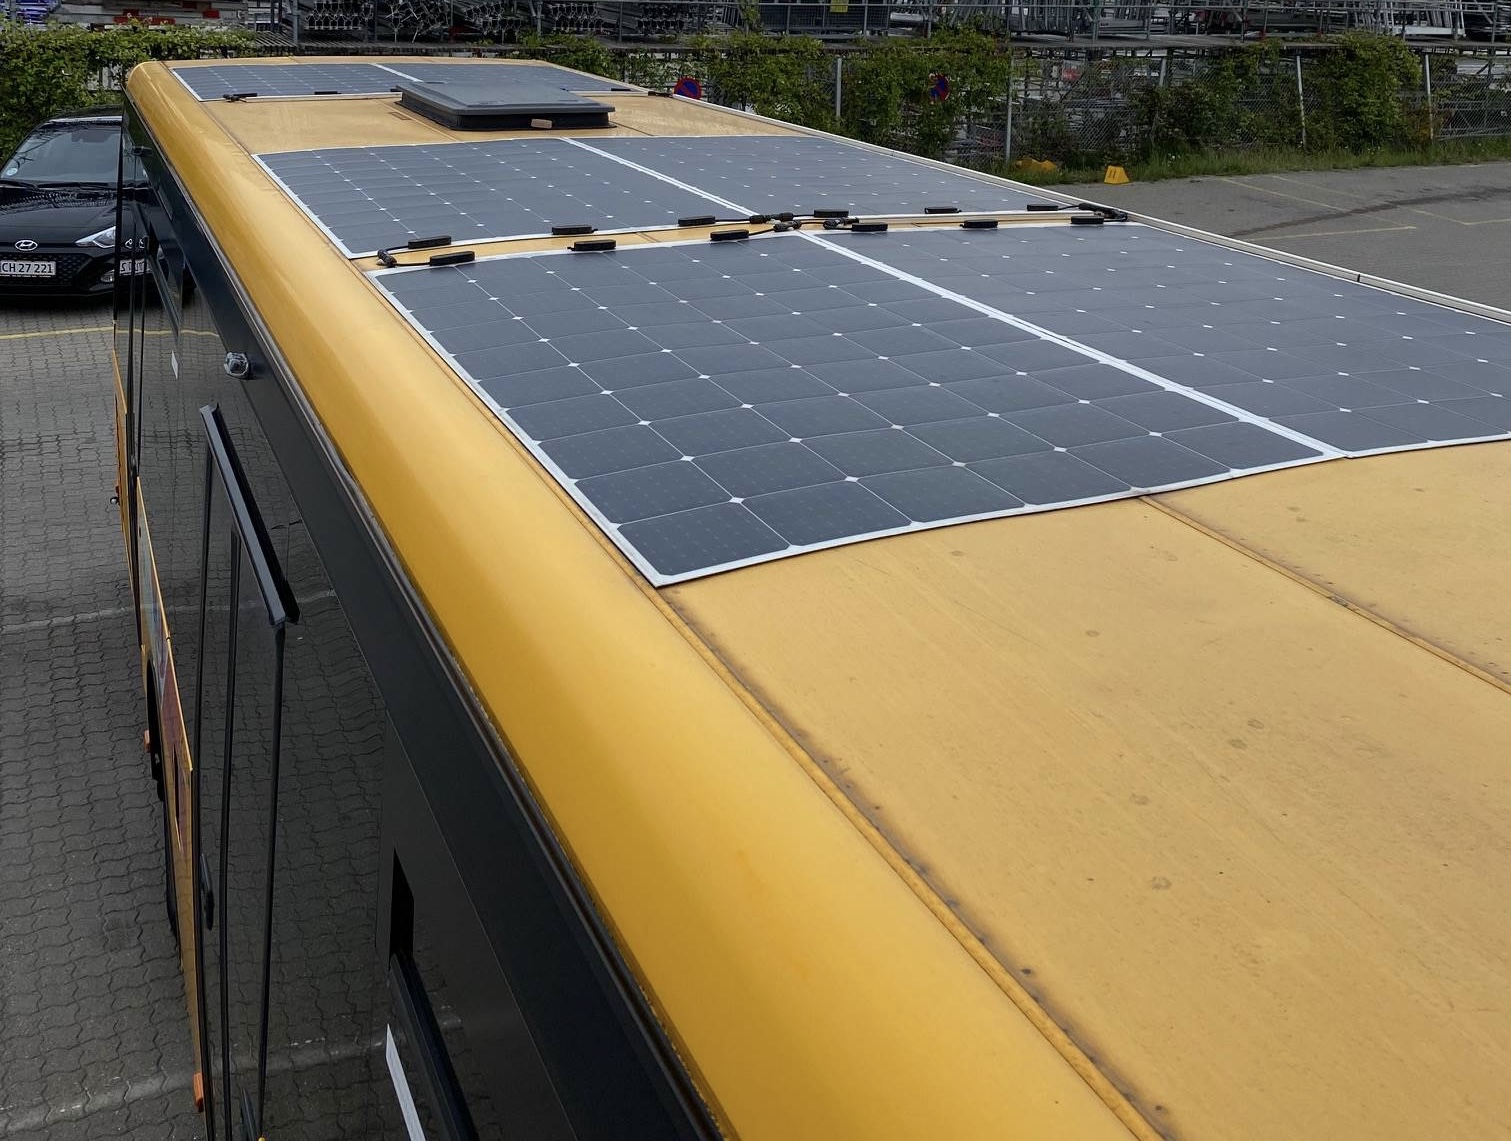 In Denmark, Keolis uses solar panels on the roof of its buses to promote "green mobility".